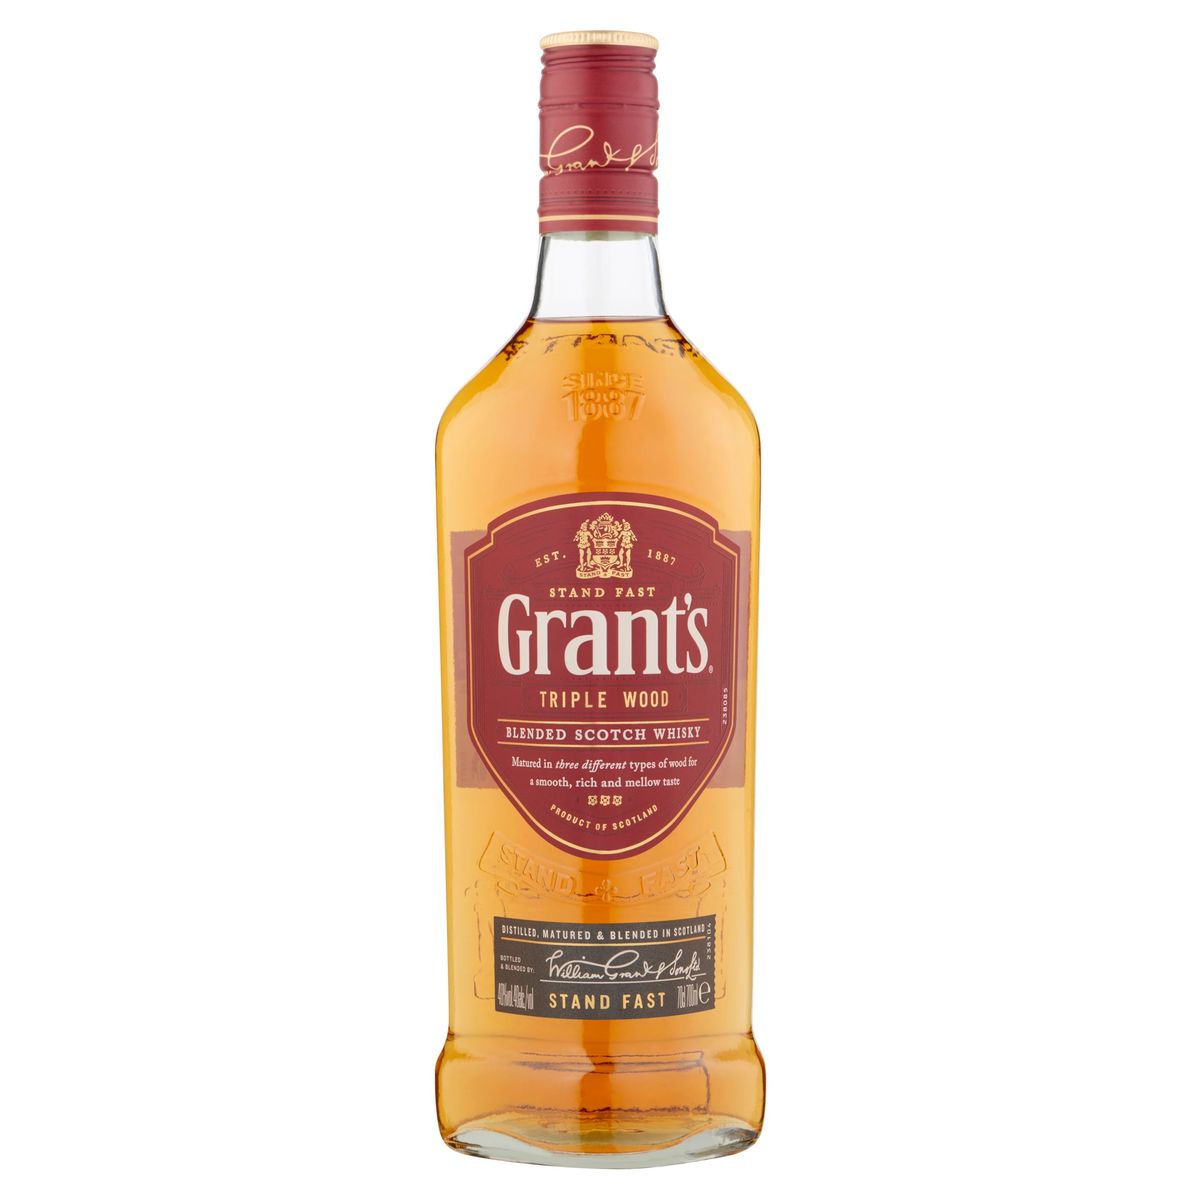 Grant's Triple Wood Blended Scotch Whisky 70 cl